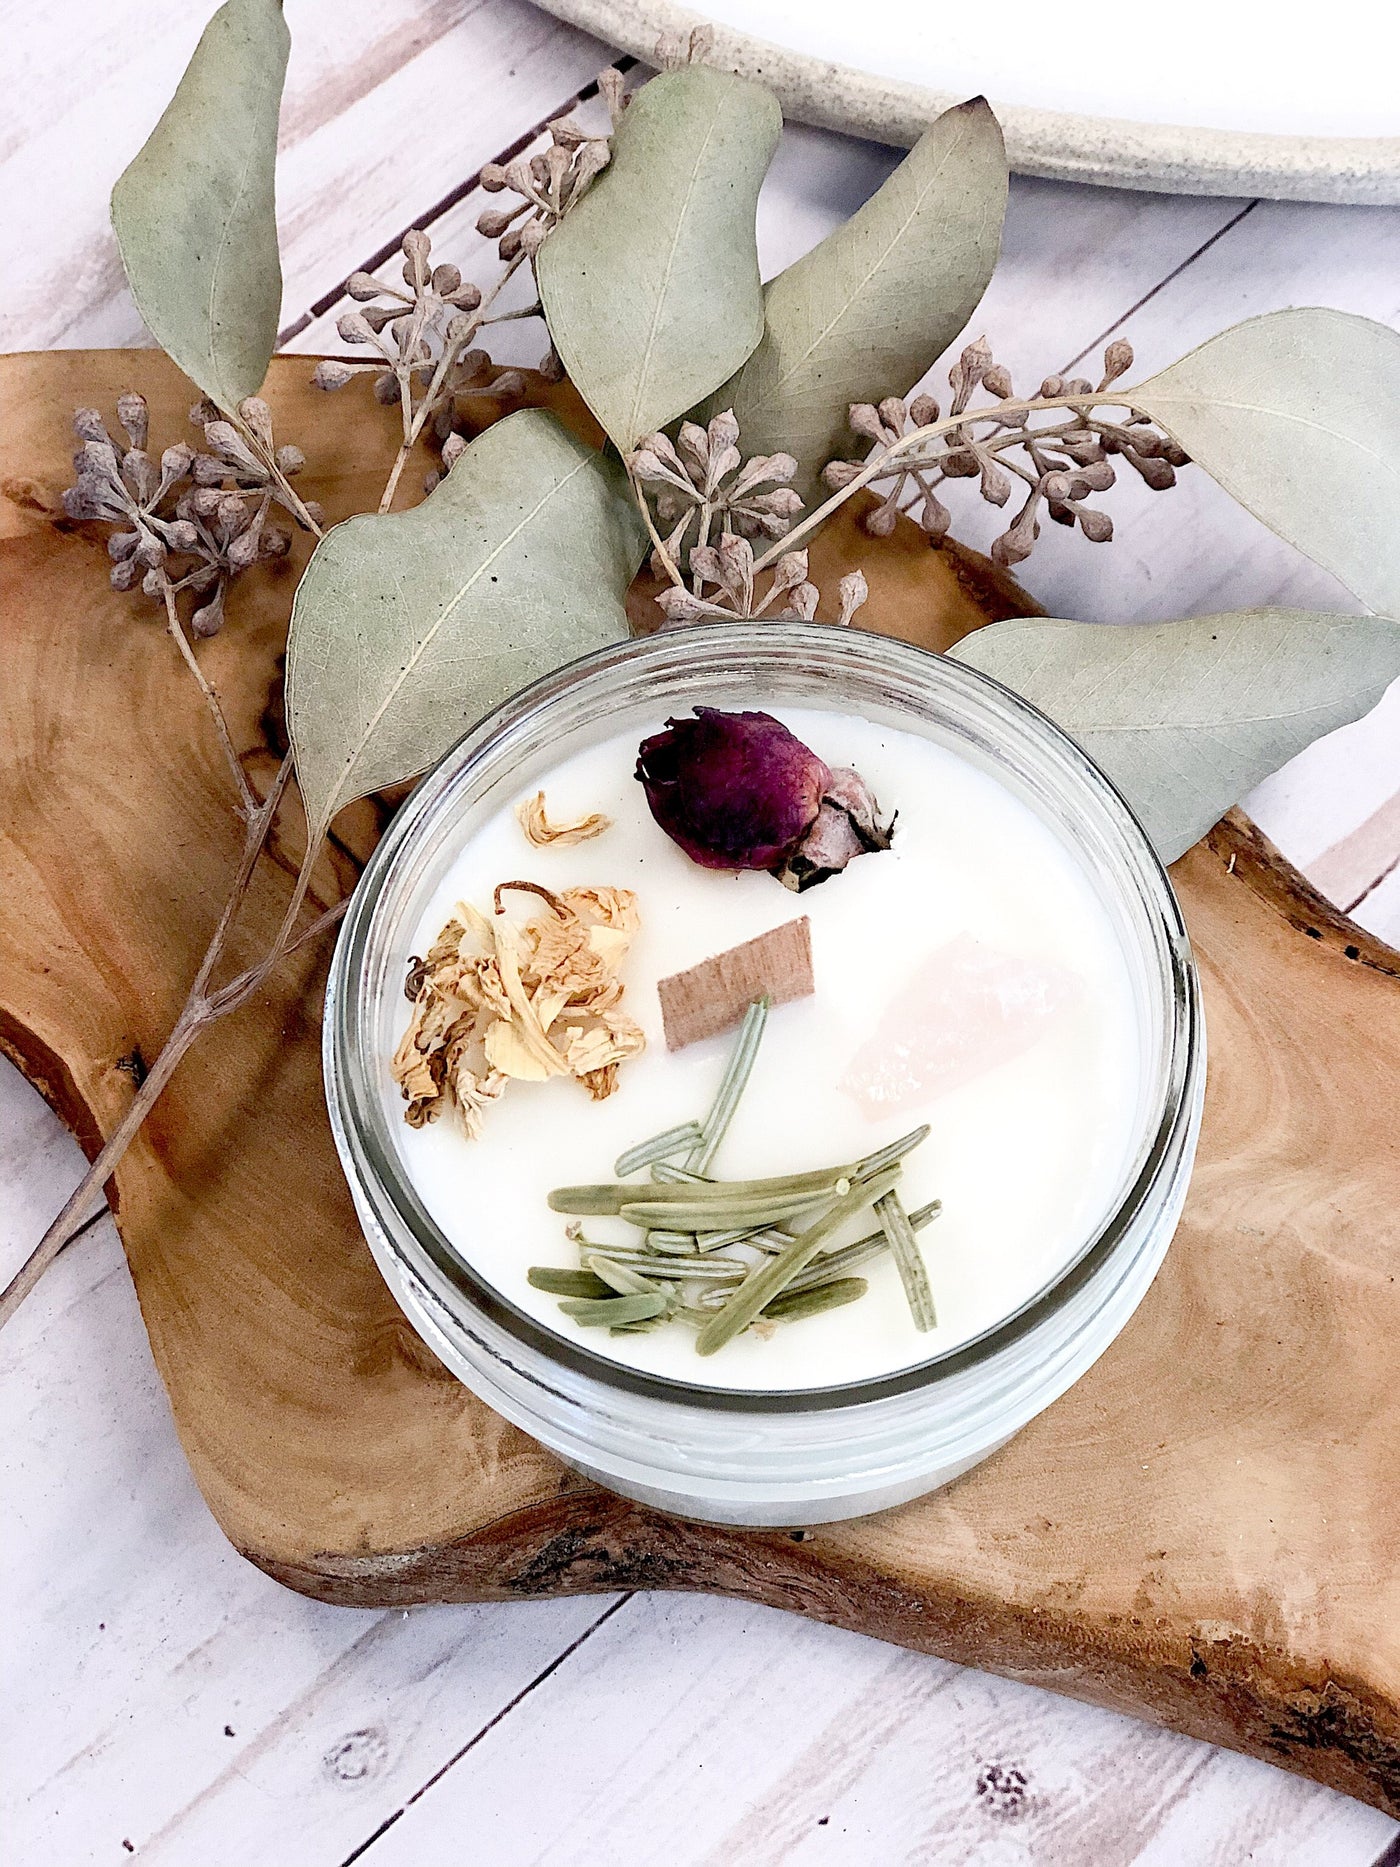 Organic Vegan Cruelty-Free Soy Wax Fertility Candle With Crystals - Roses & Chains | Fashionable Clothing, Shoes, Accessories, & More